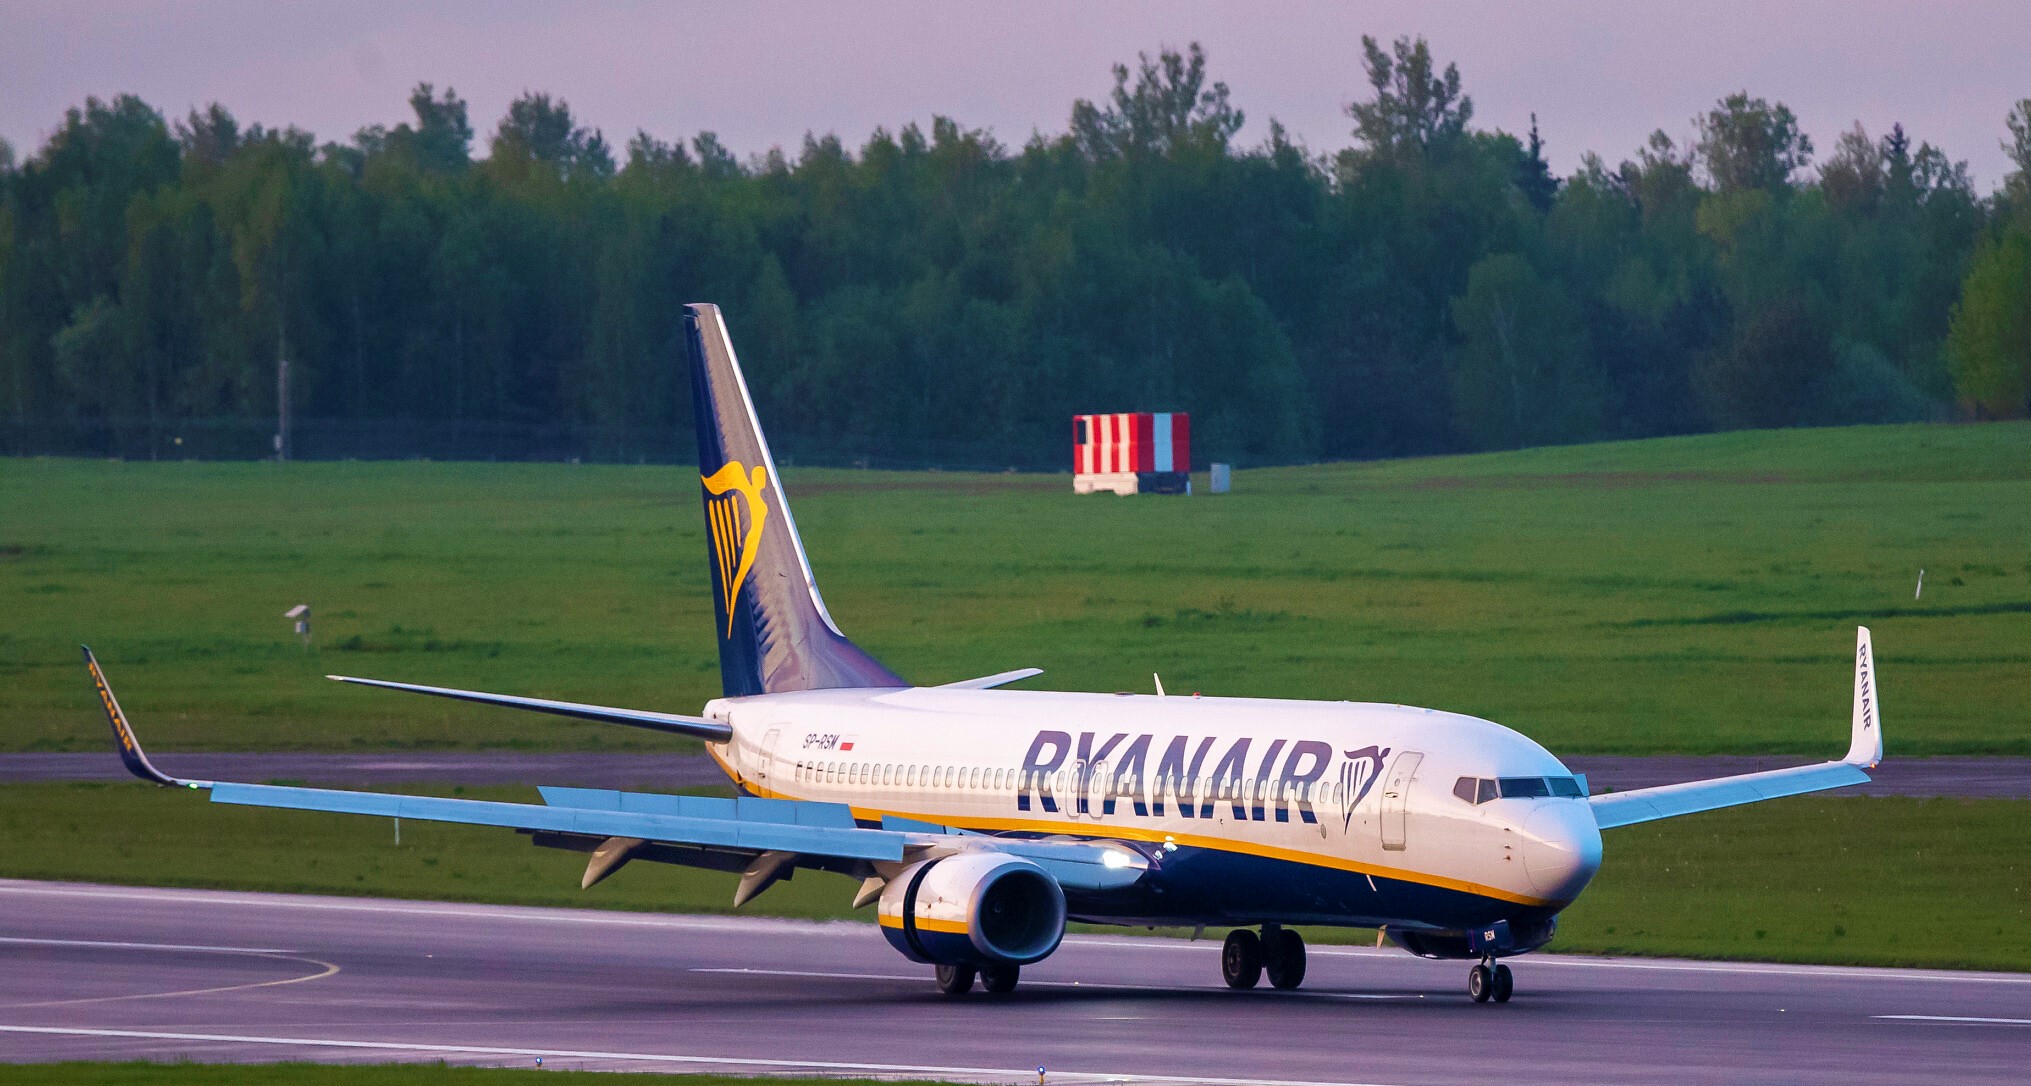 Job Opening alert - Ryanair is recruiting for Cabin crews in UK and Europe .